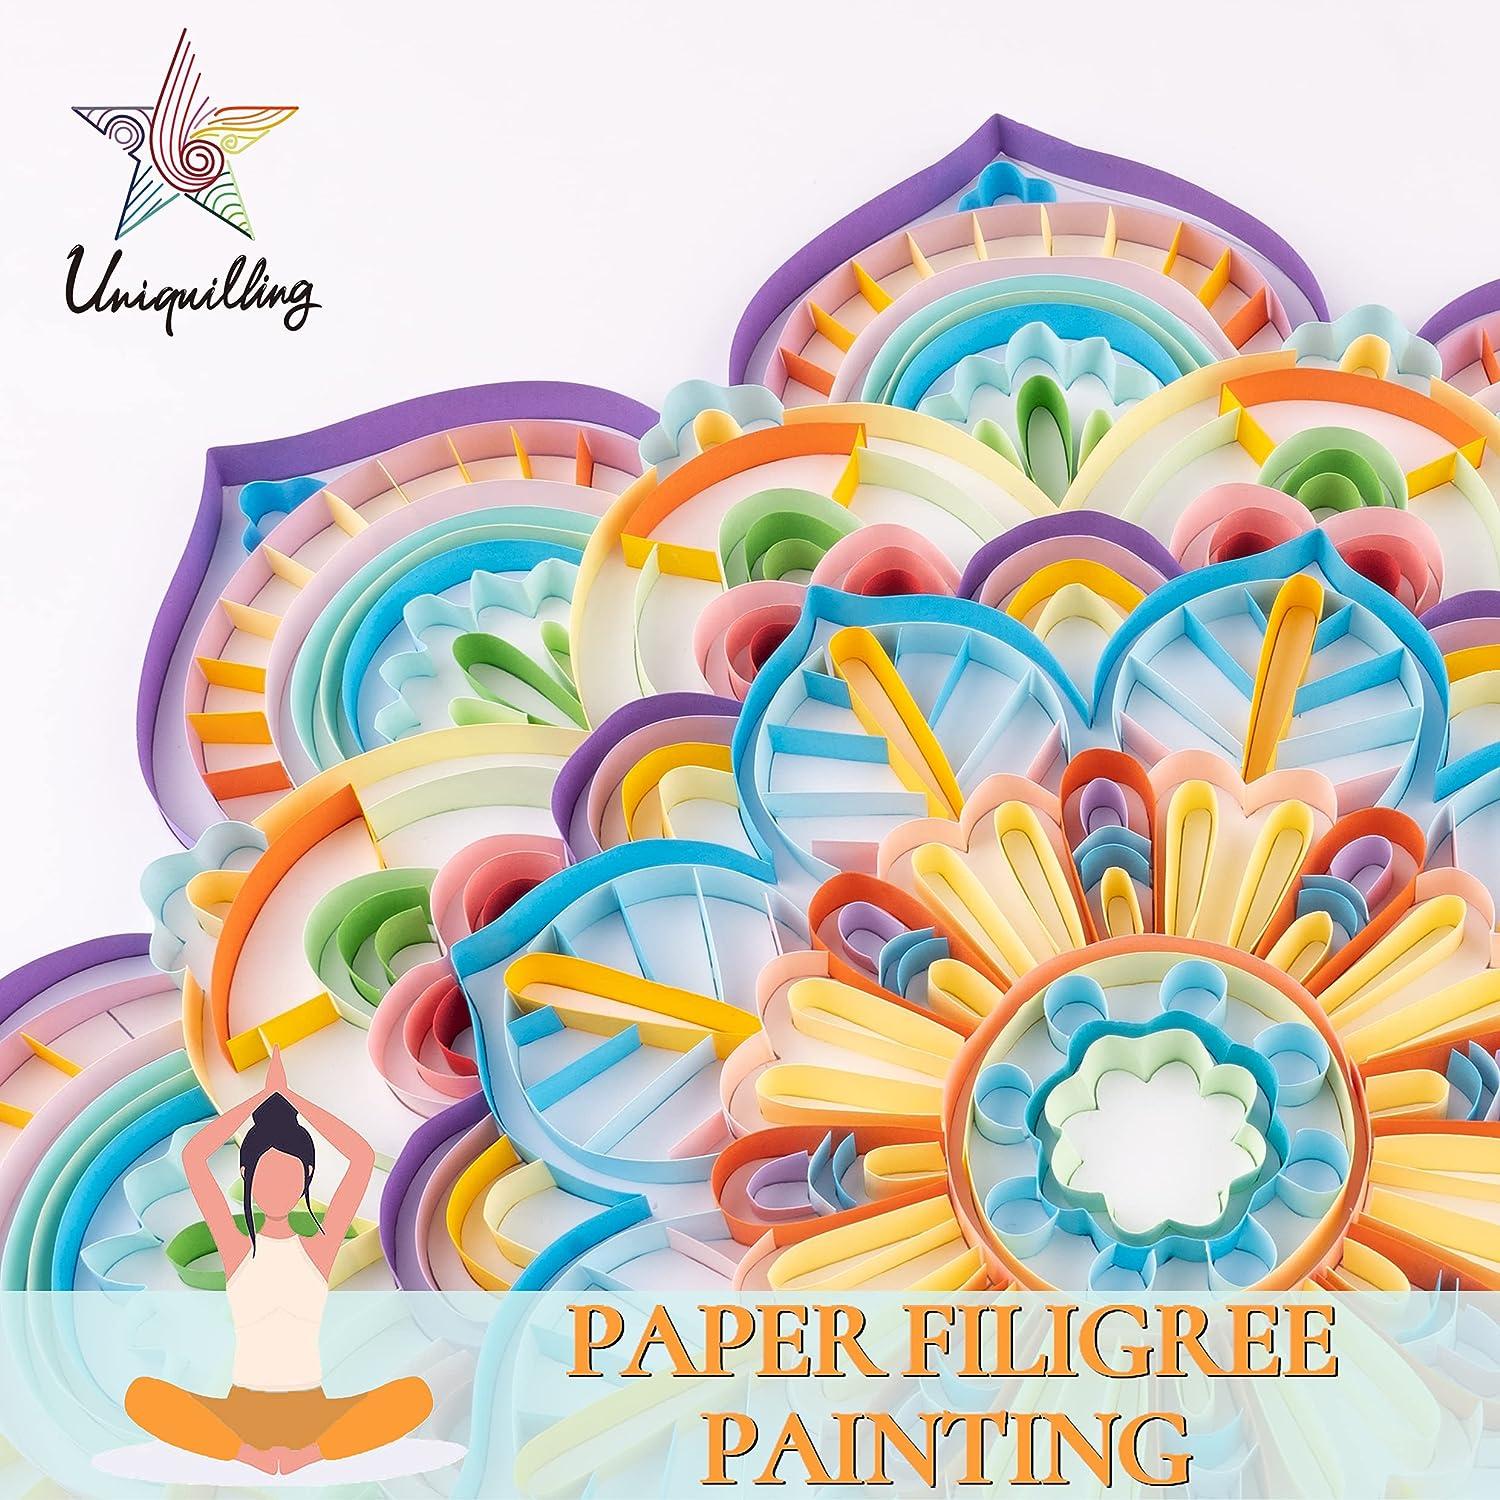  Uniquilling Quilling Paper Quilling Kit for Adults, 8